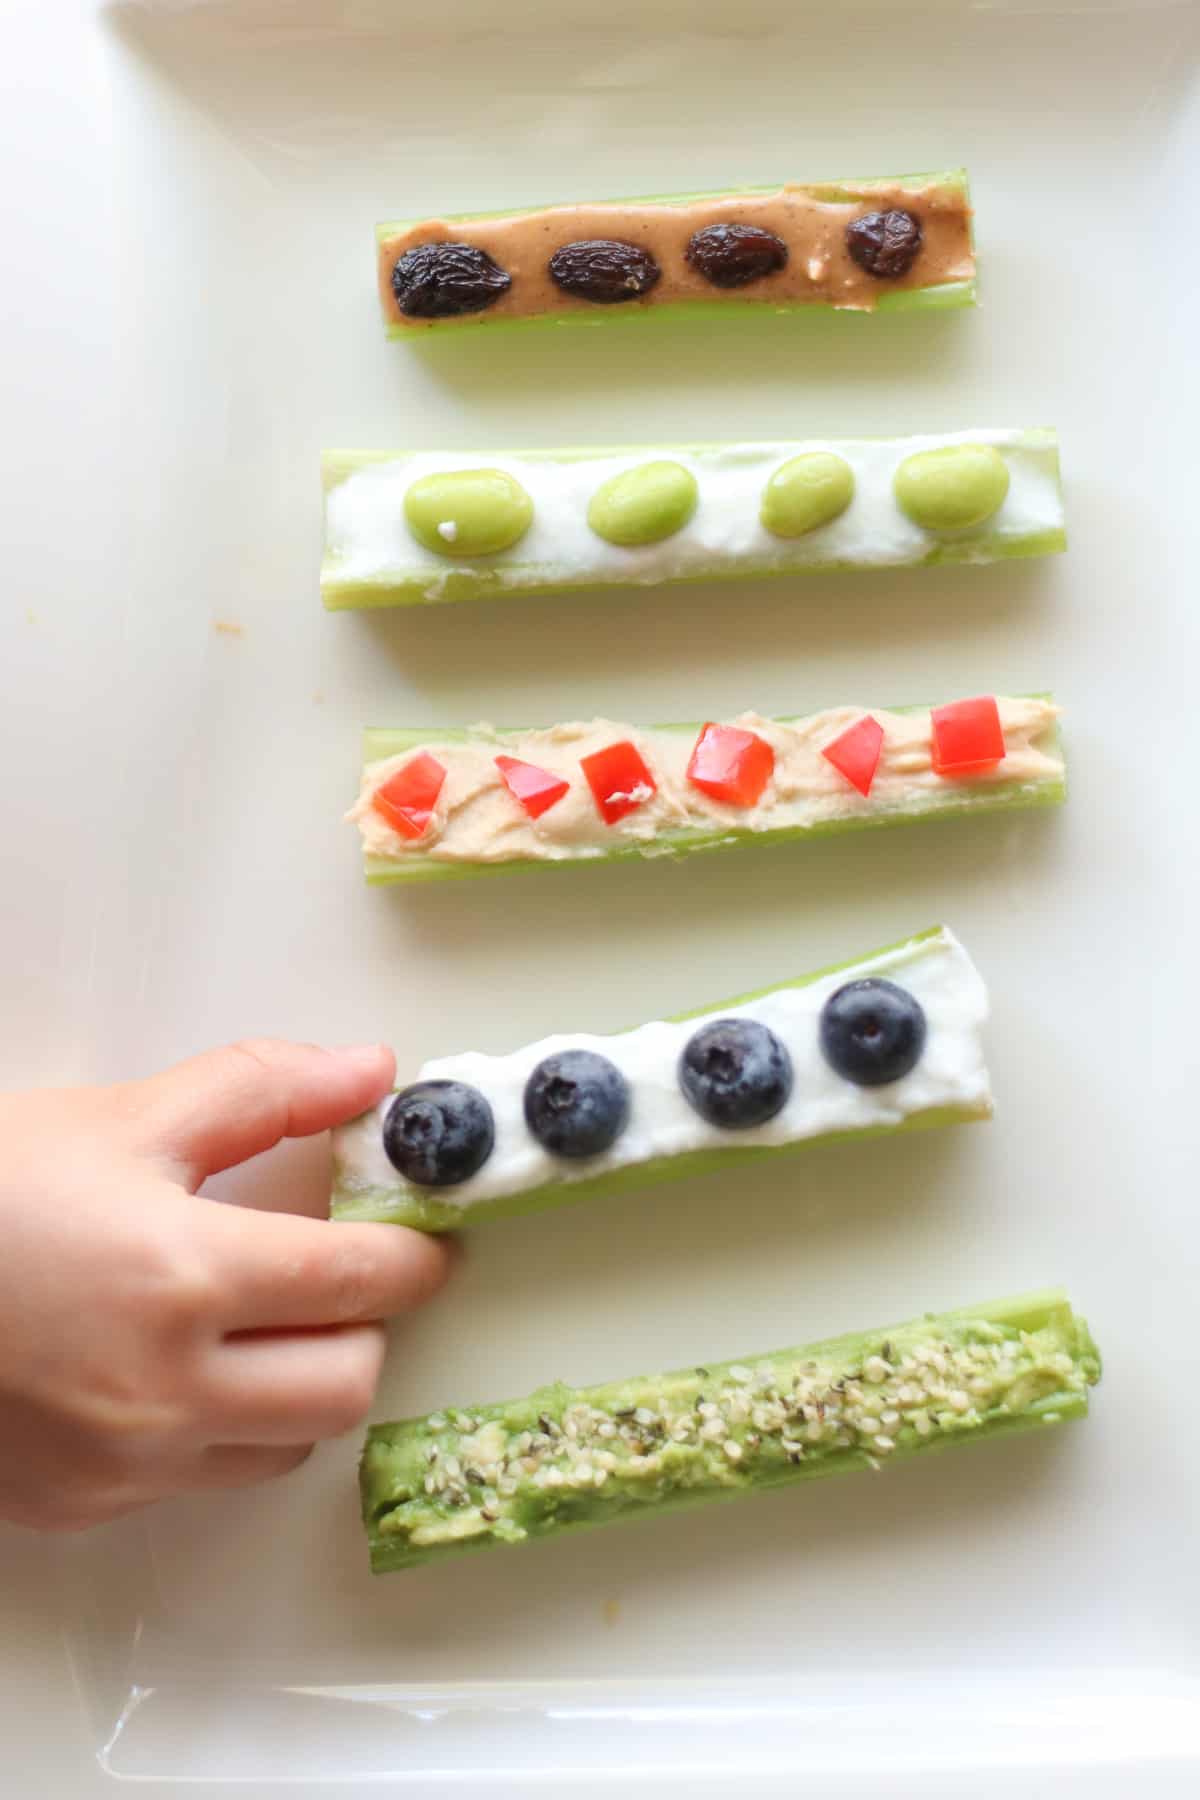 5 celery sticks with various fillings and toppings.